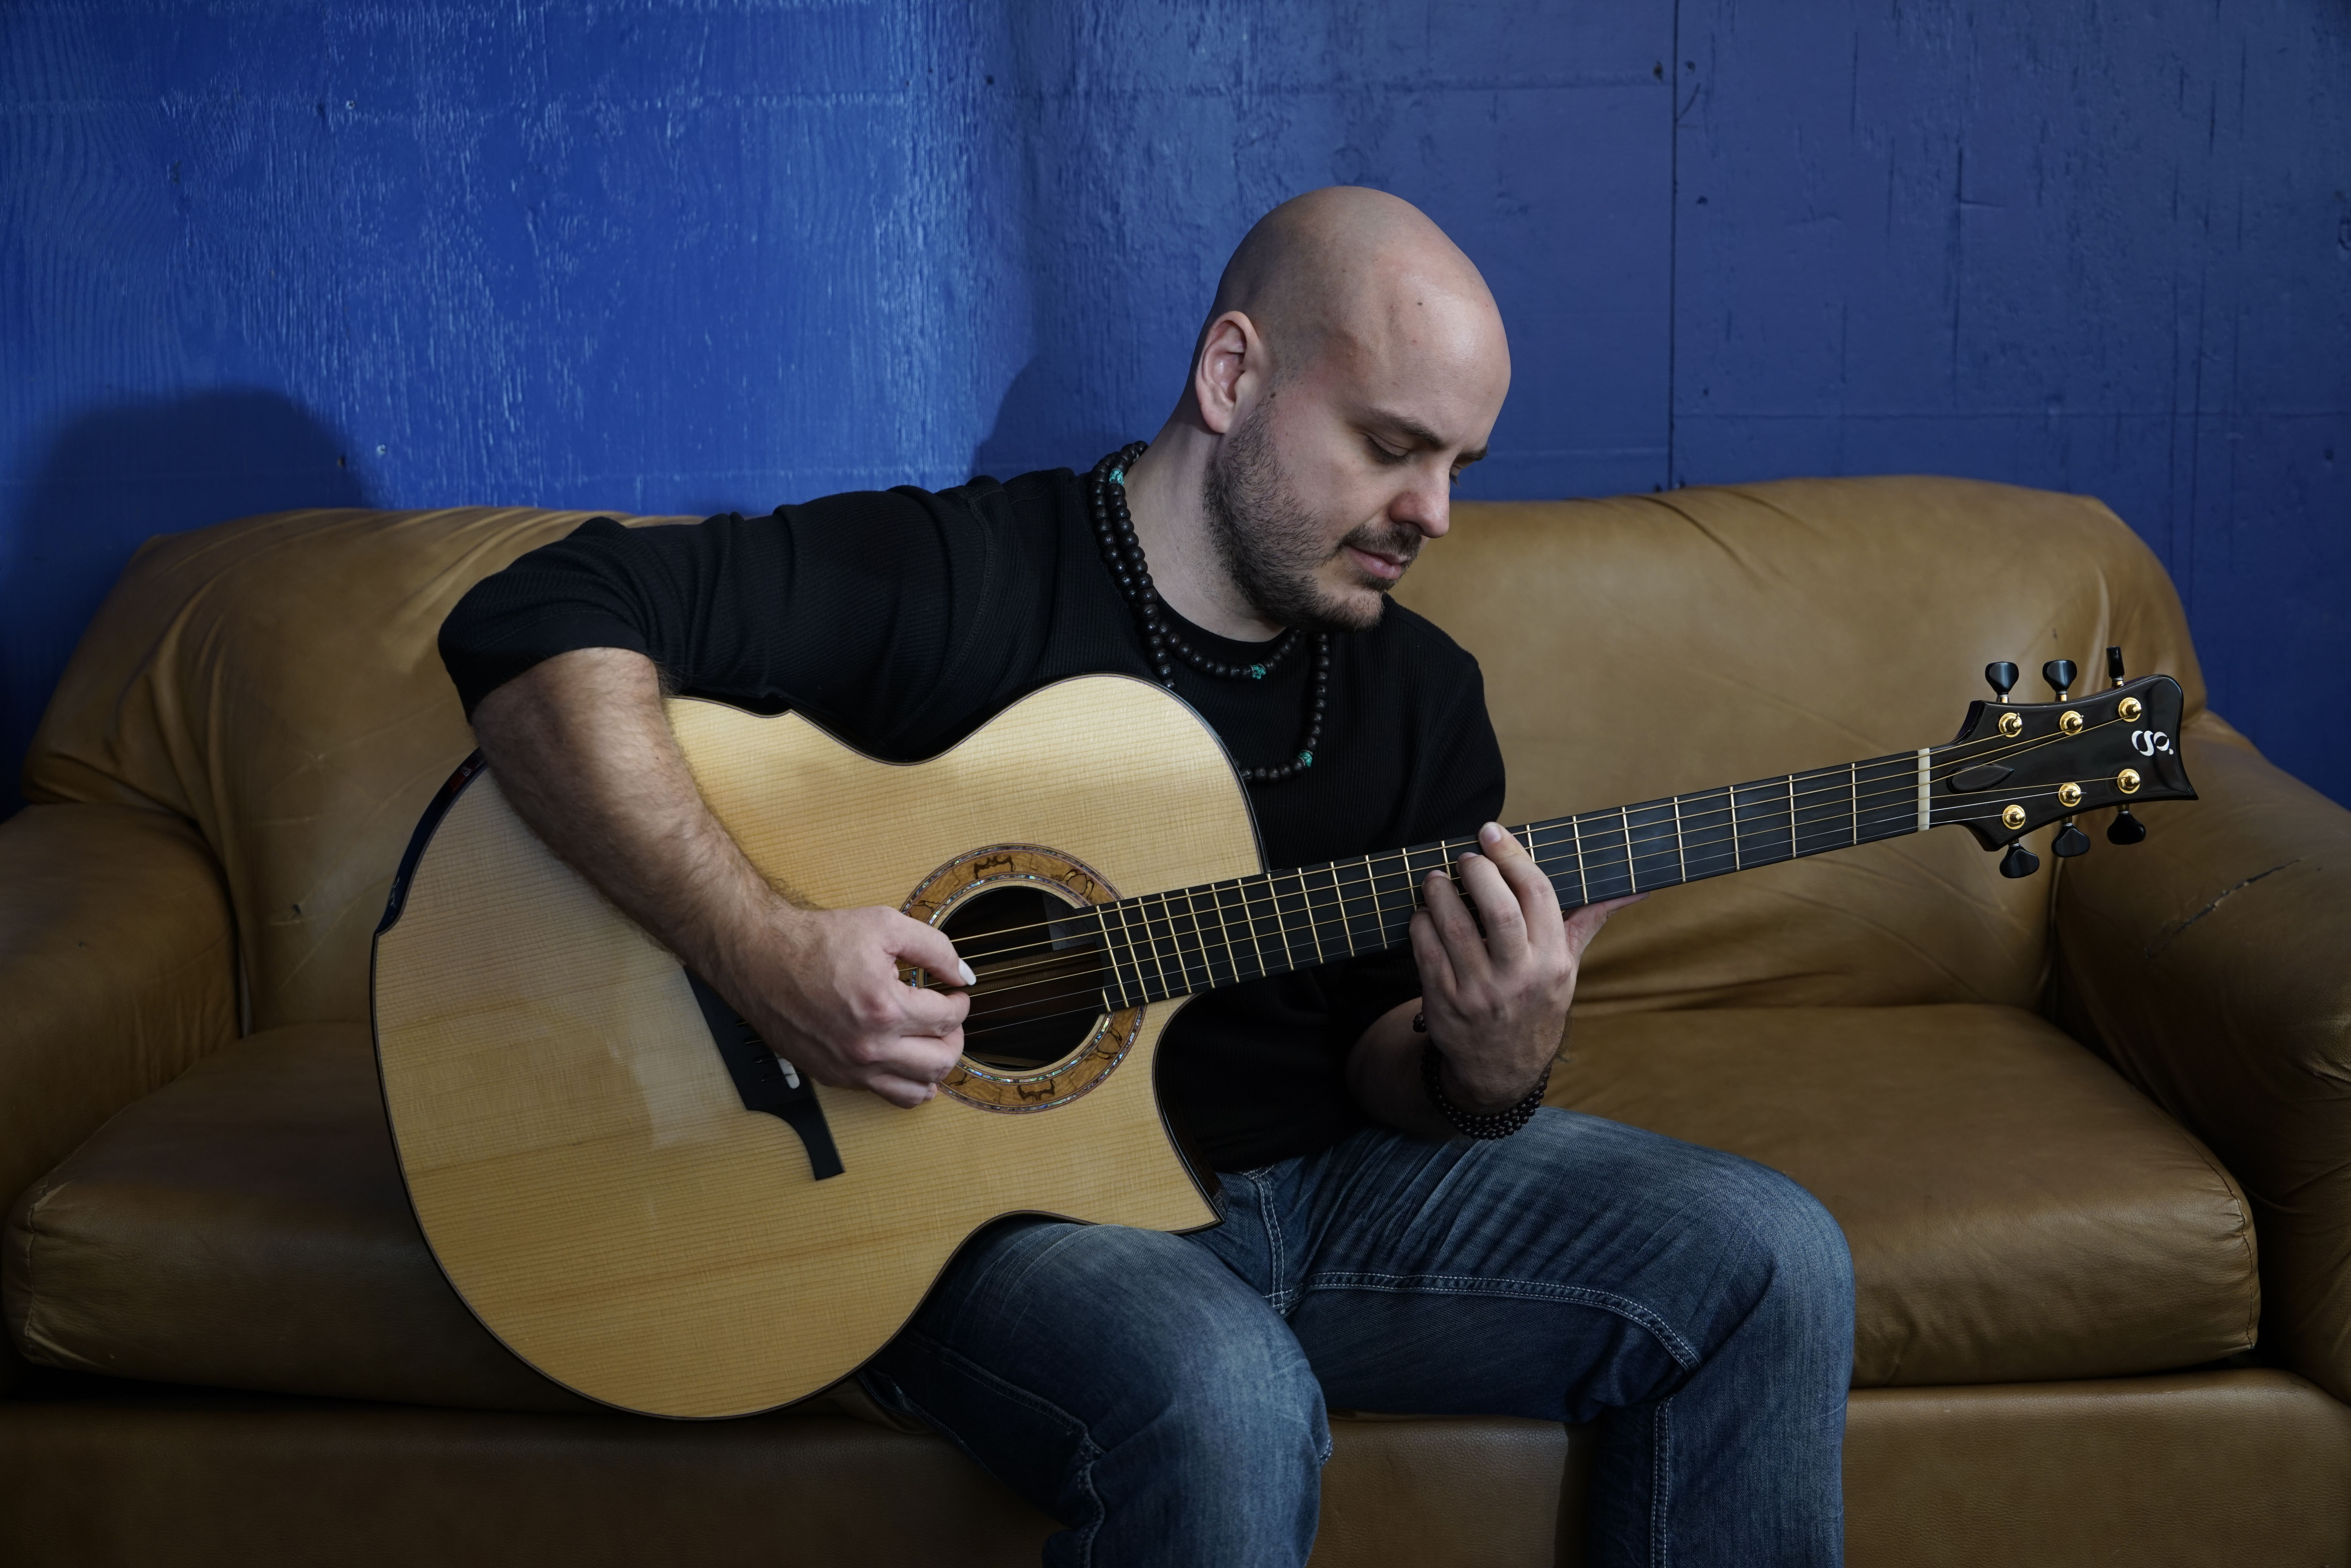 andy mckee tour